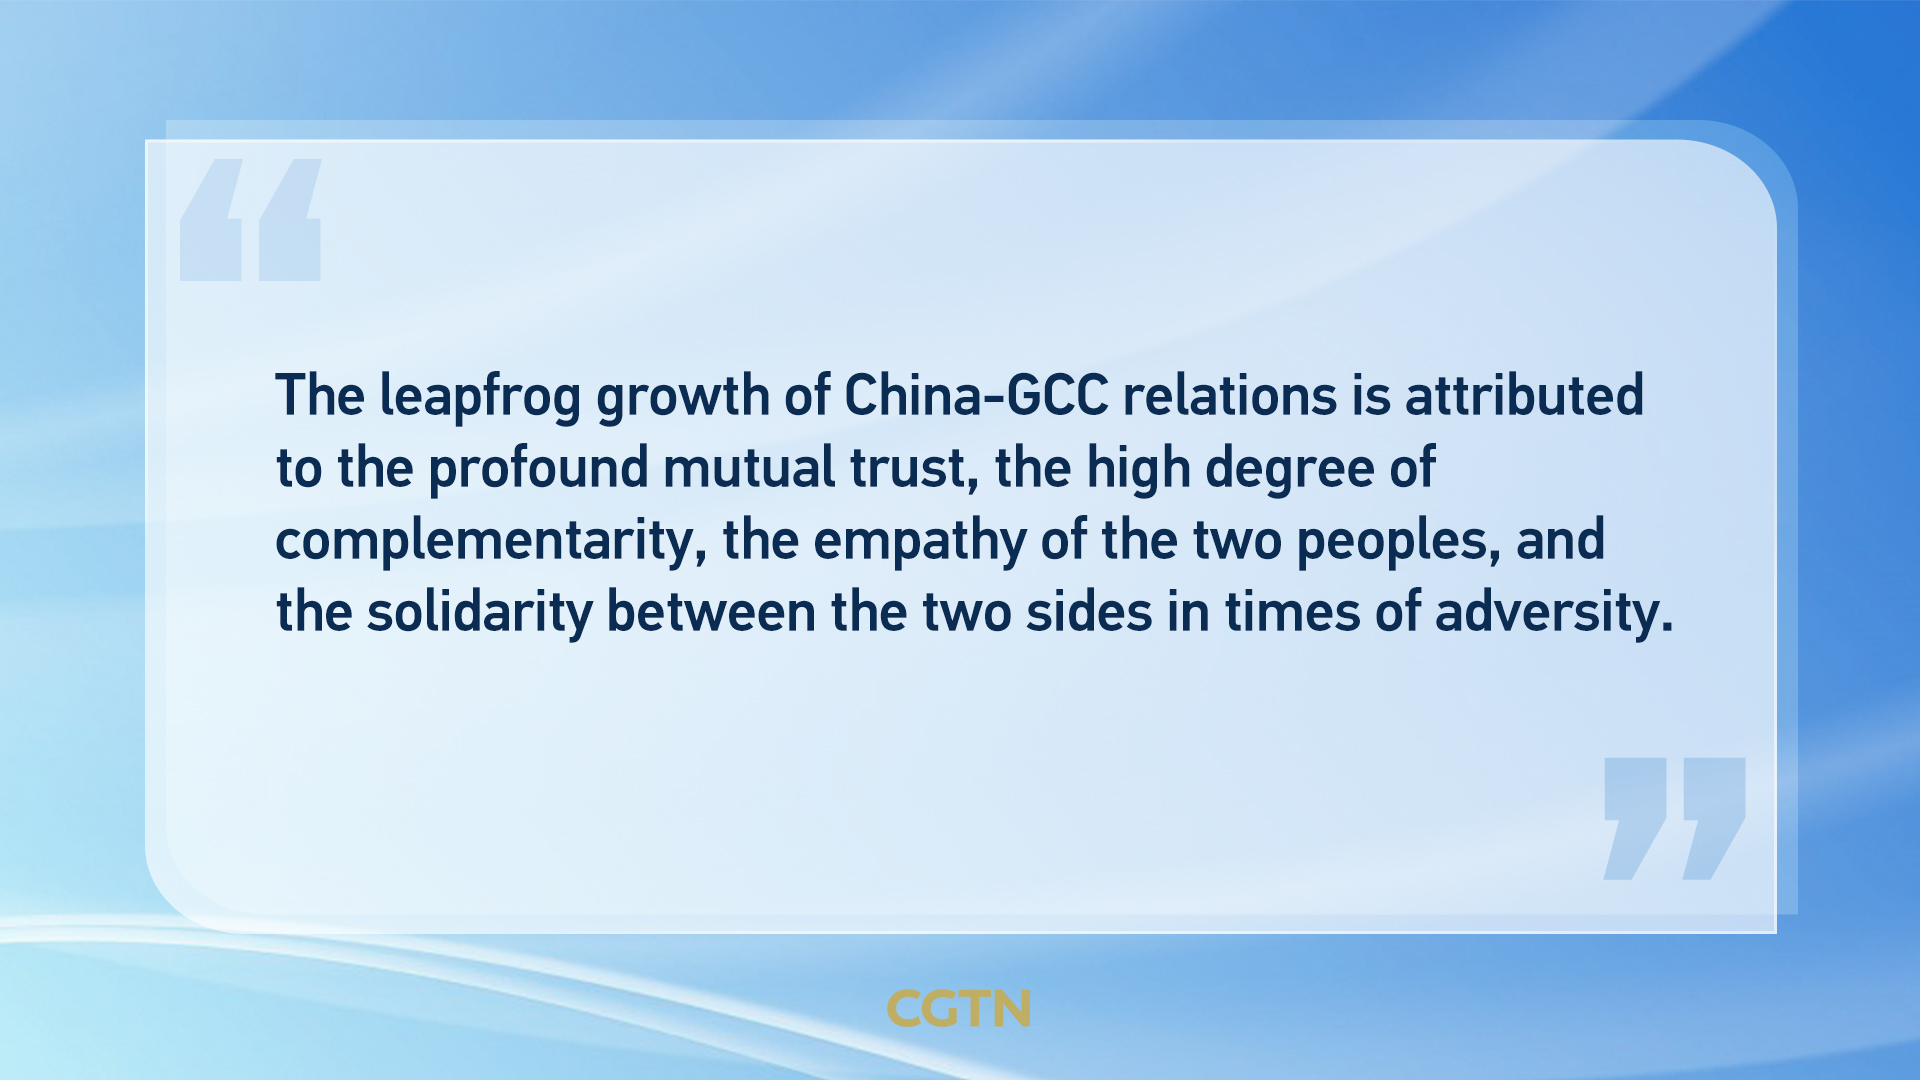 Key quotes from Xi Jinping's keynote speech at the China-Gulf Cooperation Council Summit